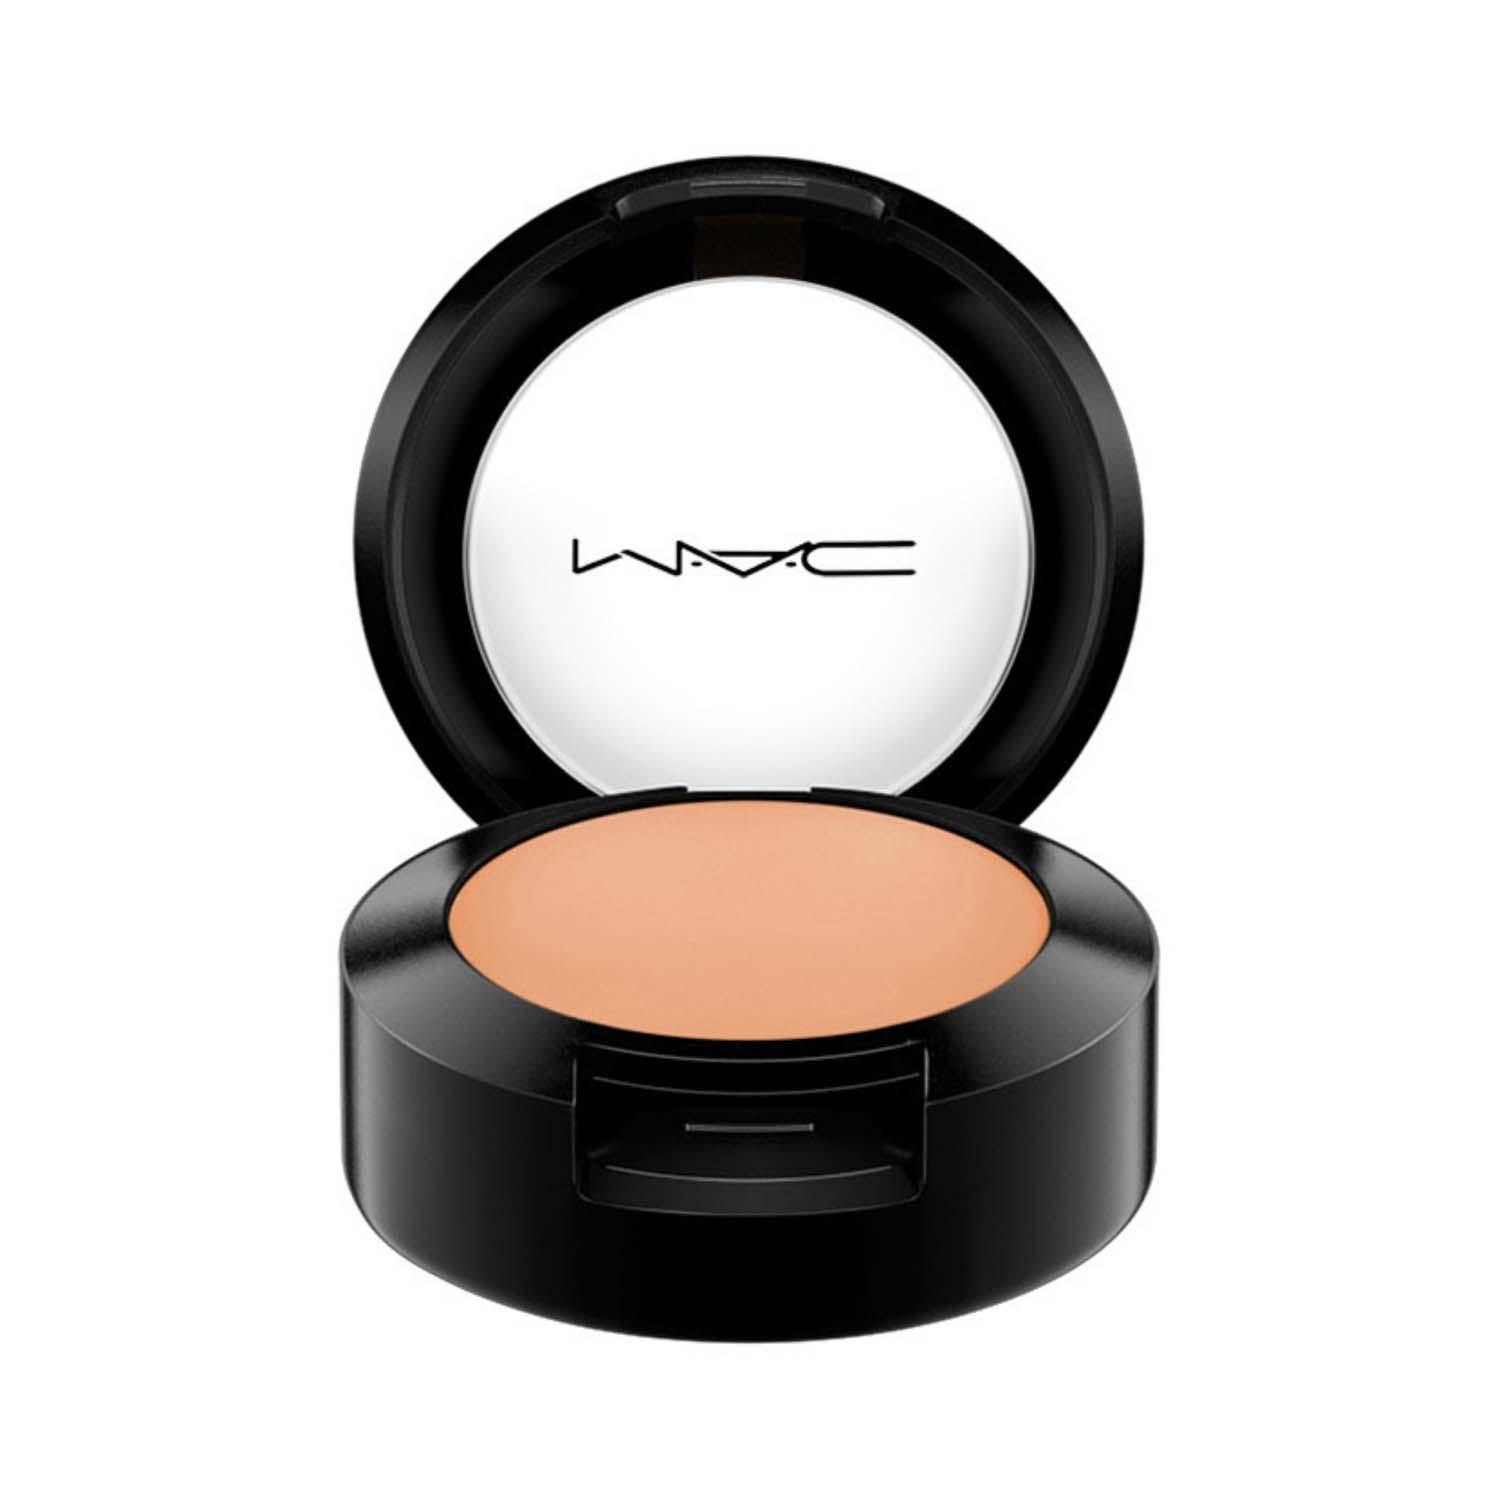 M.A.C | M.A.C Studio Finish SPF 35 Concealer - NW35 (7g)